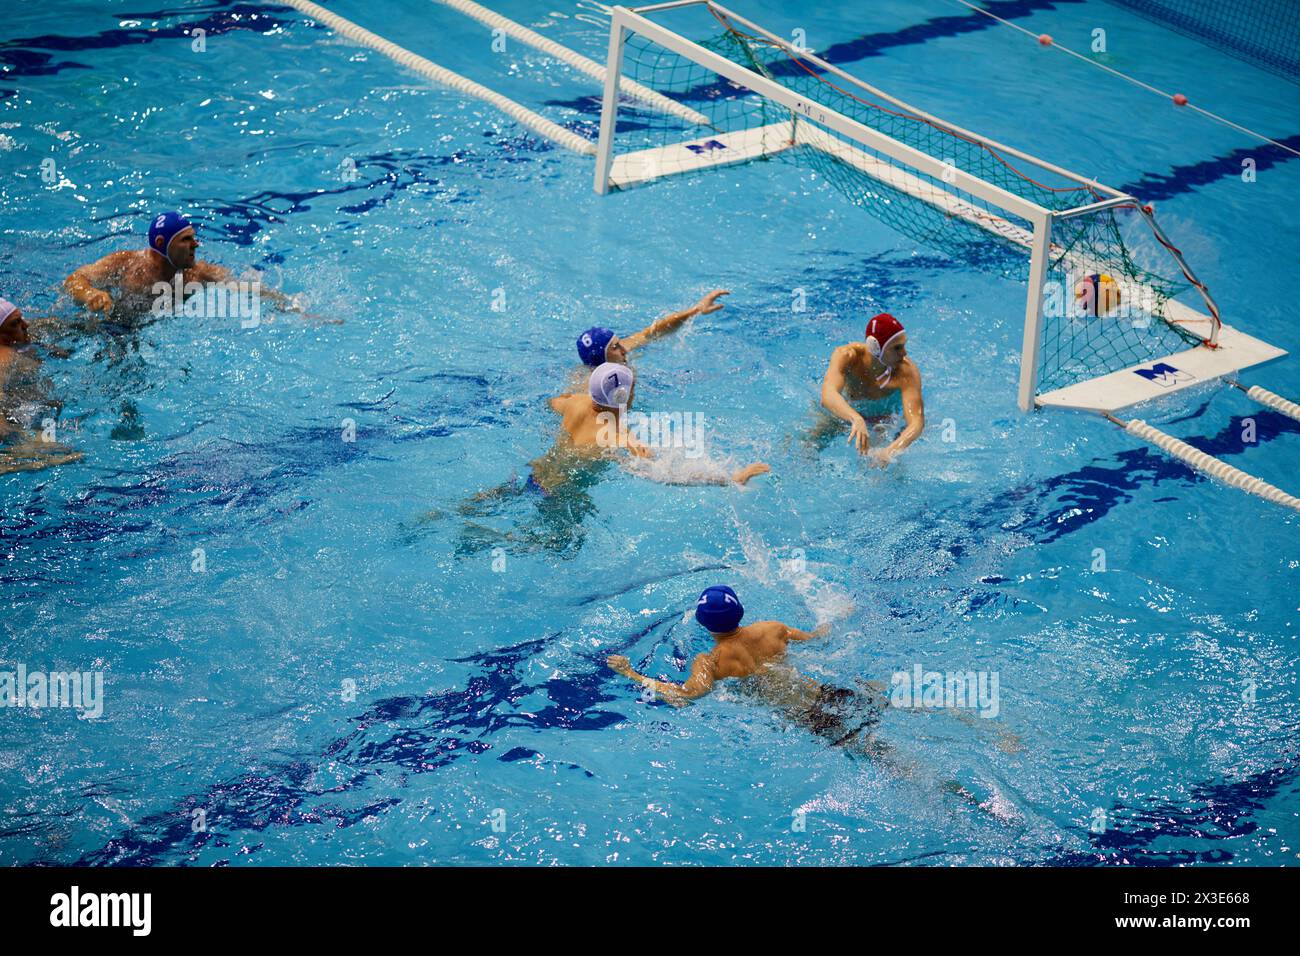 KAZAN, RUSSIA - DEC 09, 2017: Goalkeeper misses ball in goal during friendly match on water polo in Burevestnik basin during All Russia Swimming Compe Stock Photo